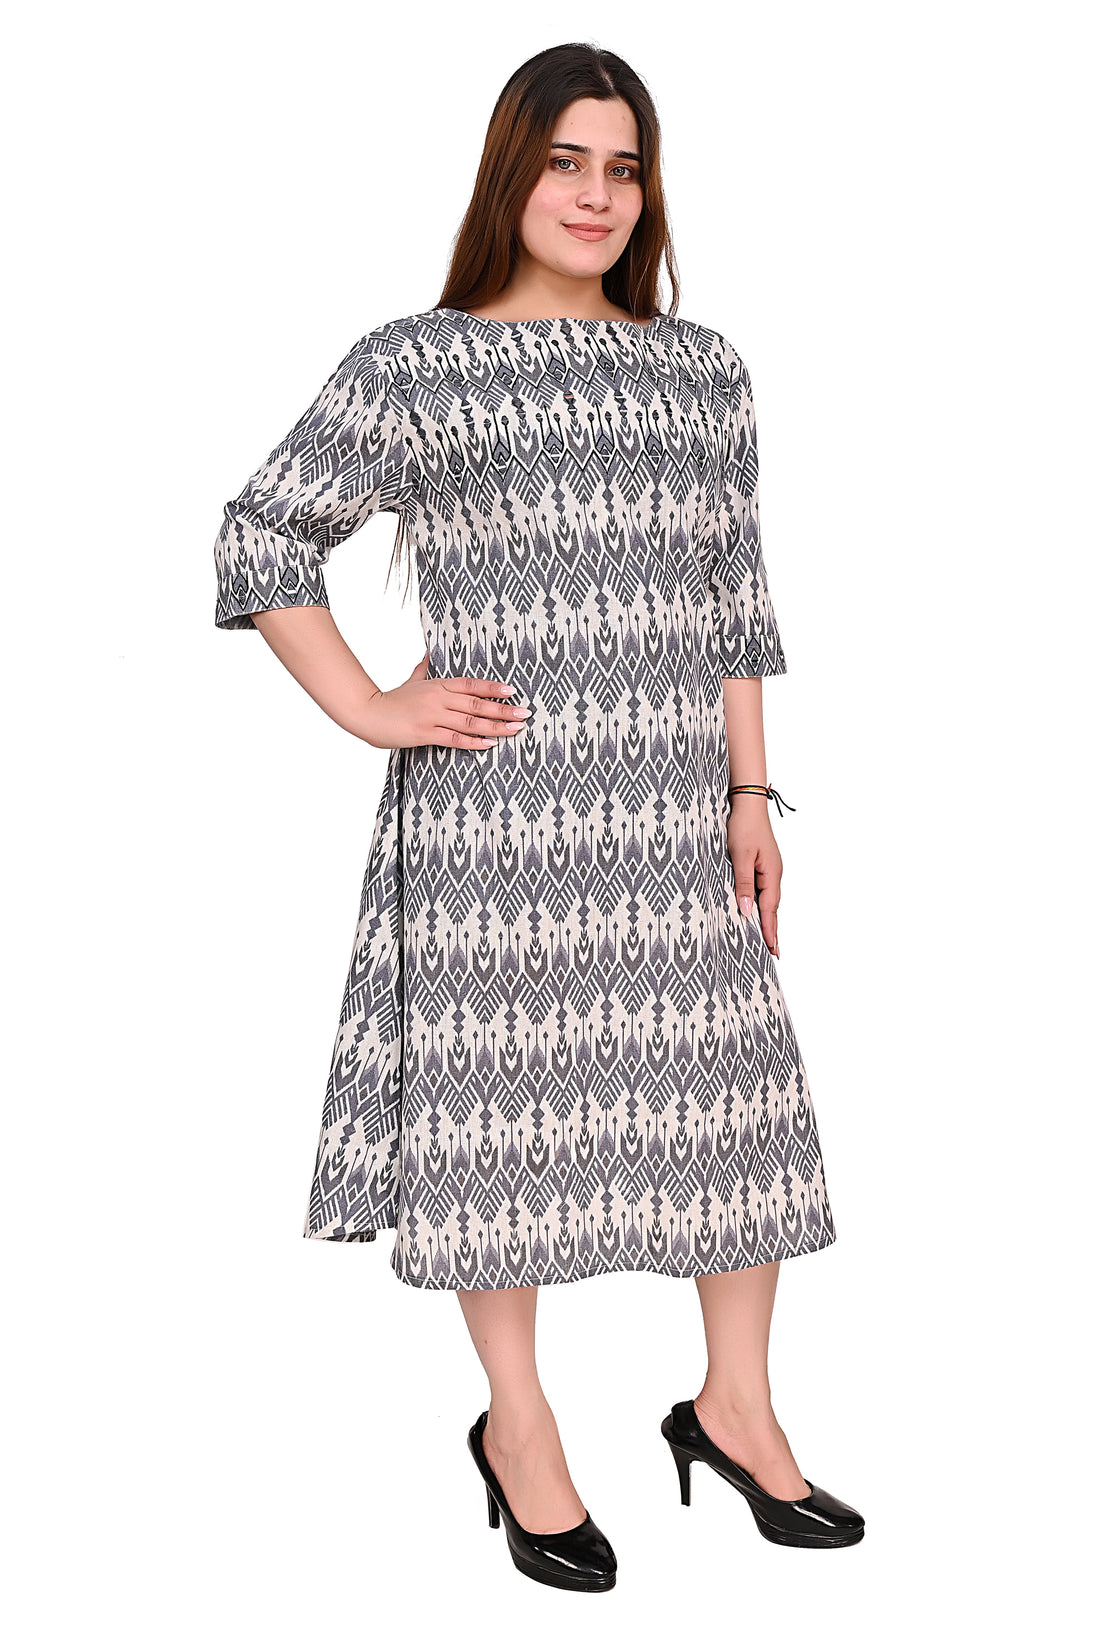 Nirmal online Premium quality digital printed and mirror embroidery Tunic Dress for Women in black & white